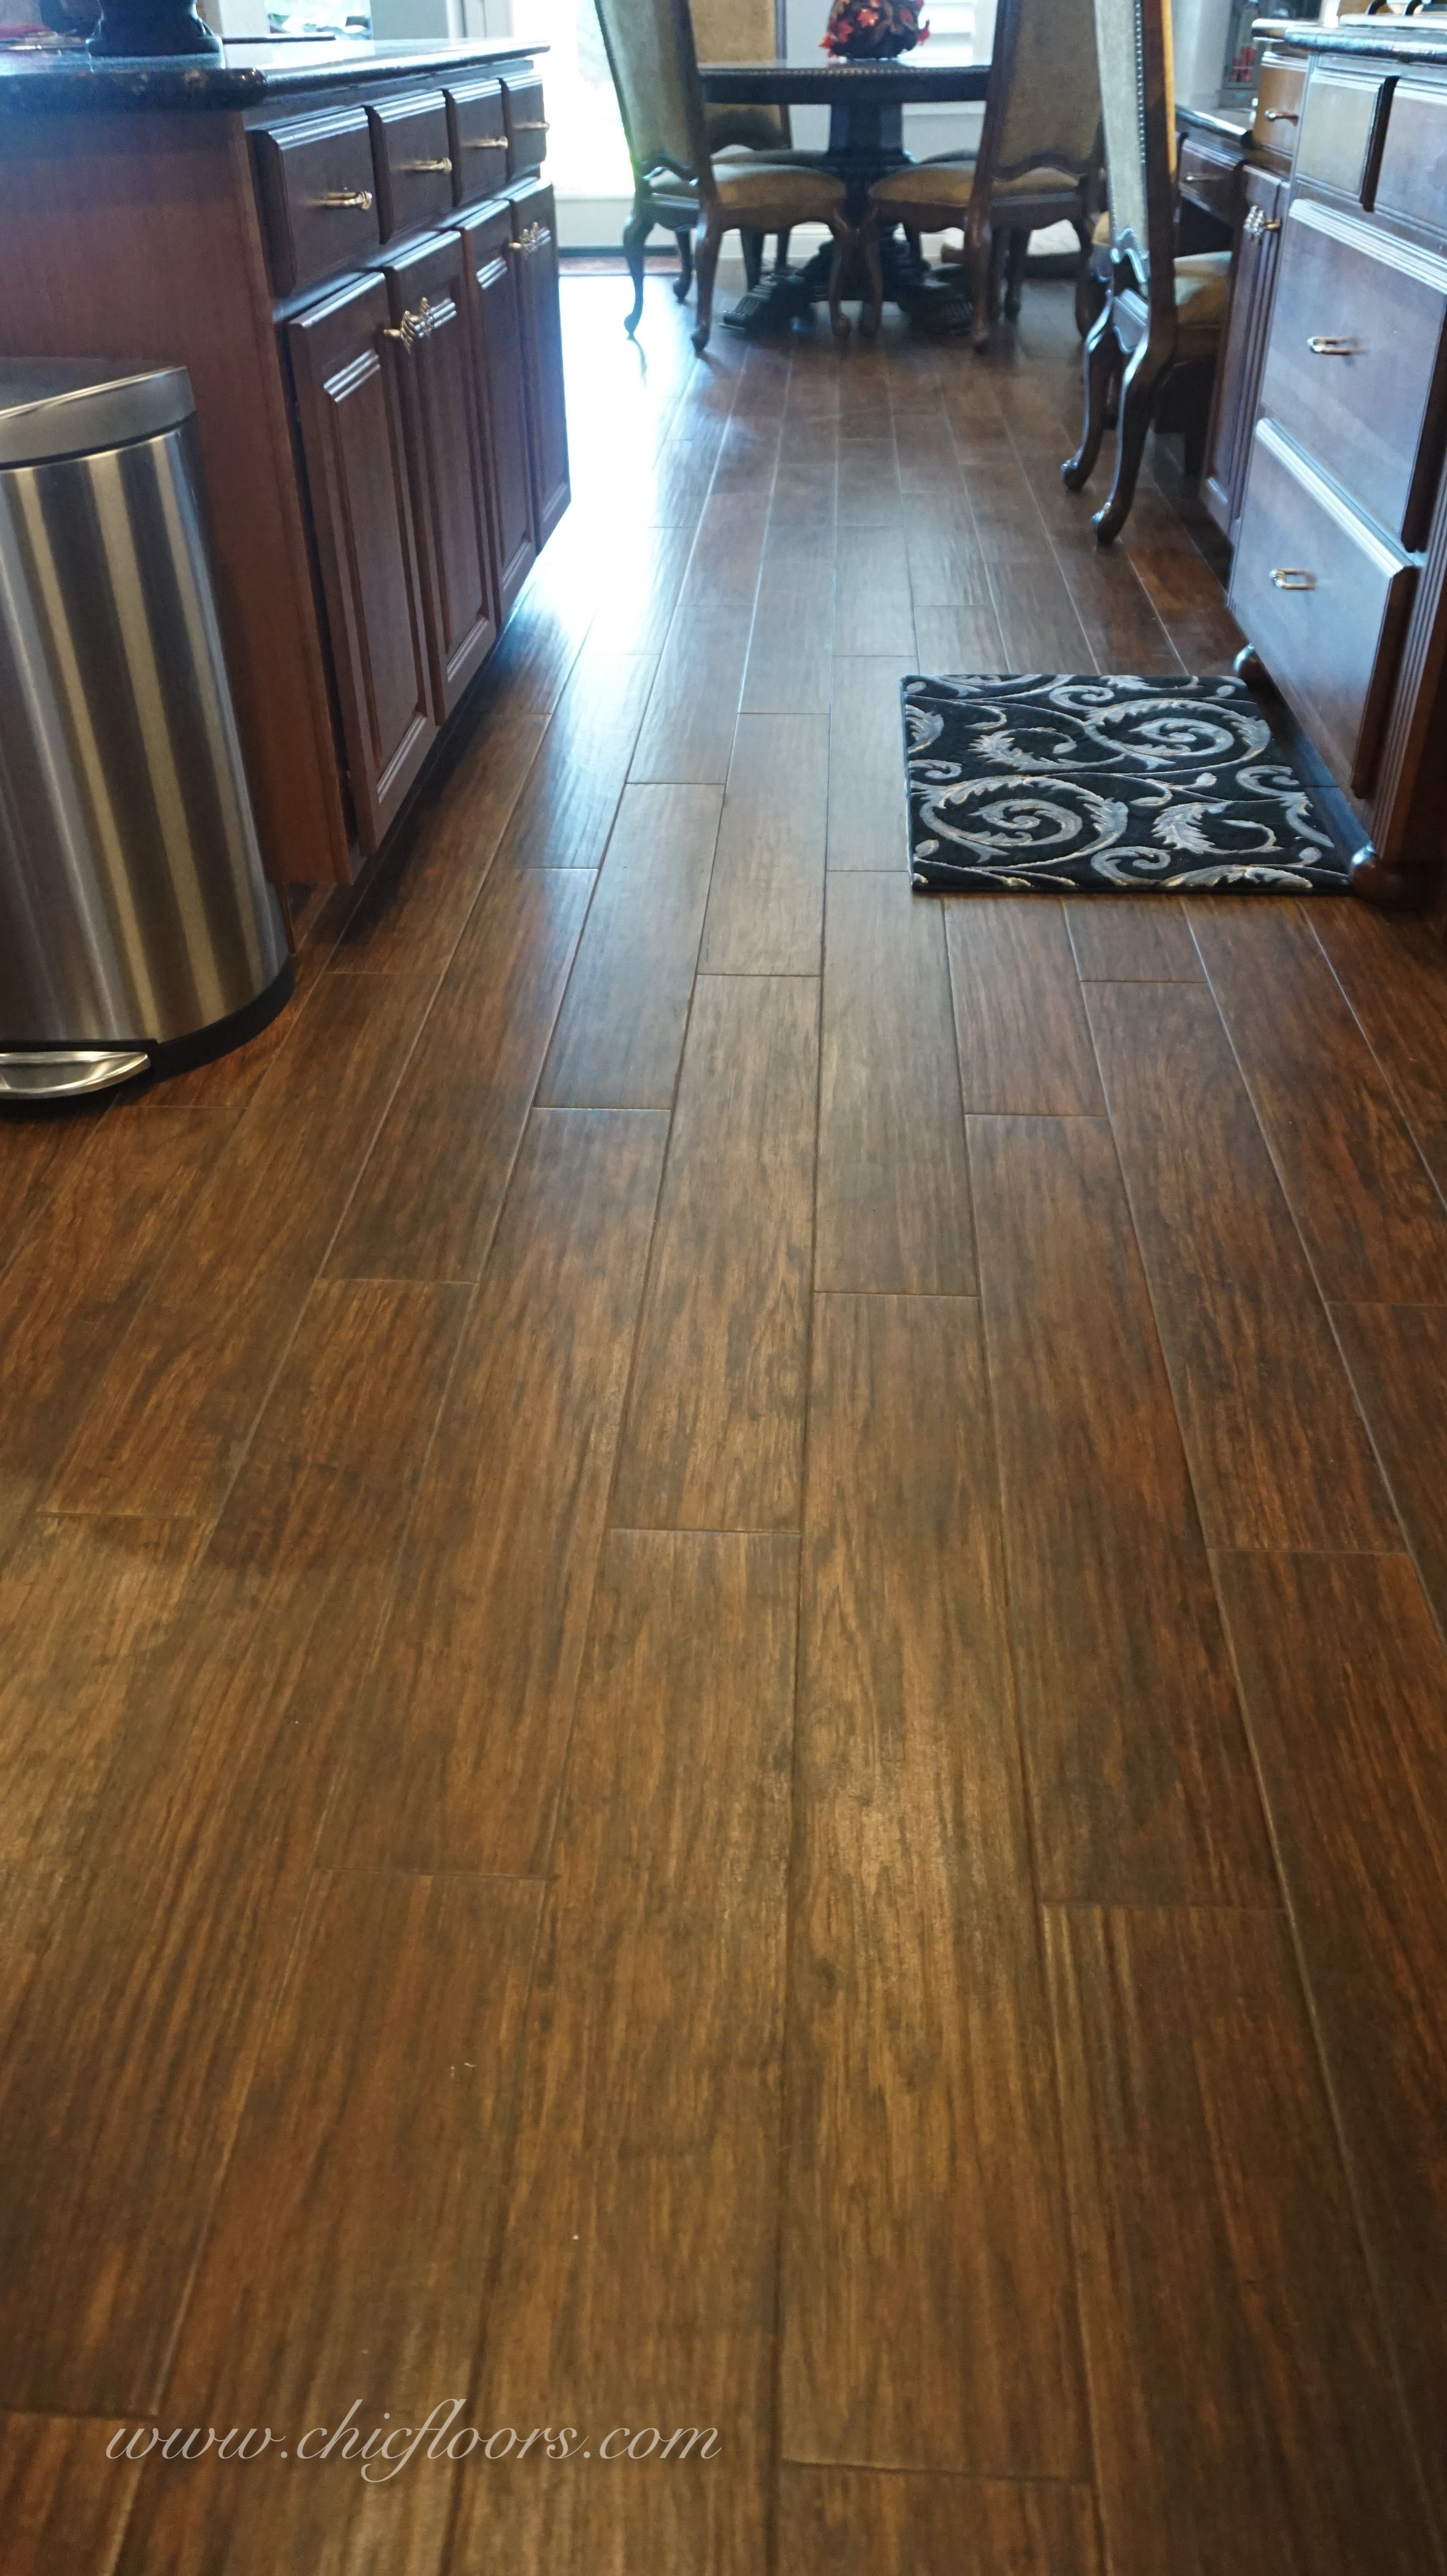 shaw acacia hardwood flooring of shaw floors petrified hickory 6x36 porcelain tile in the color 700 regarding shaw floors petrified hickory 6x36 porcelain tile in the color 700 fossil